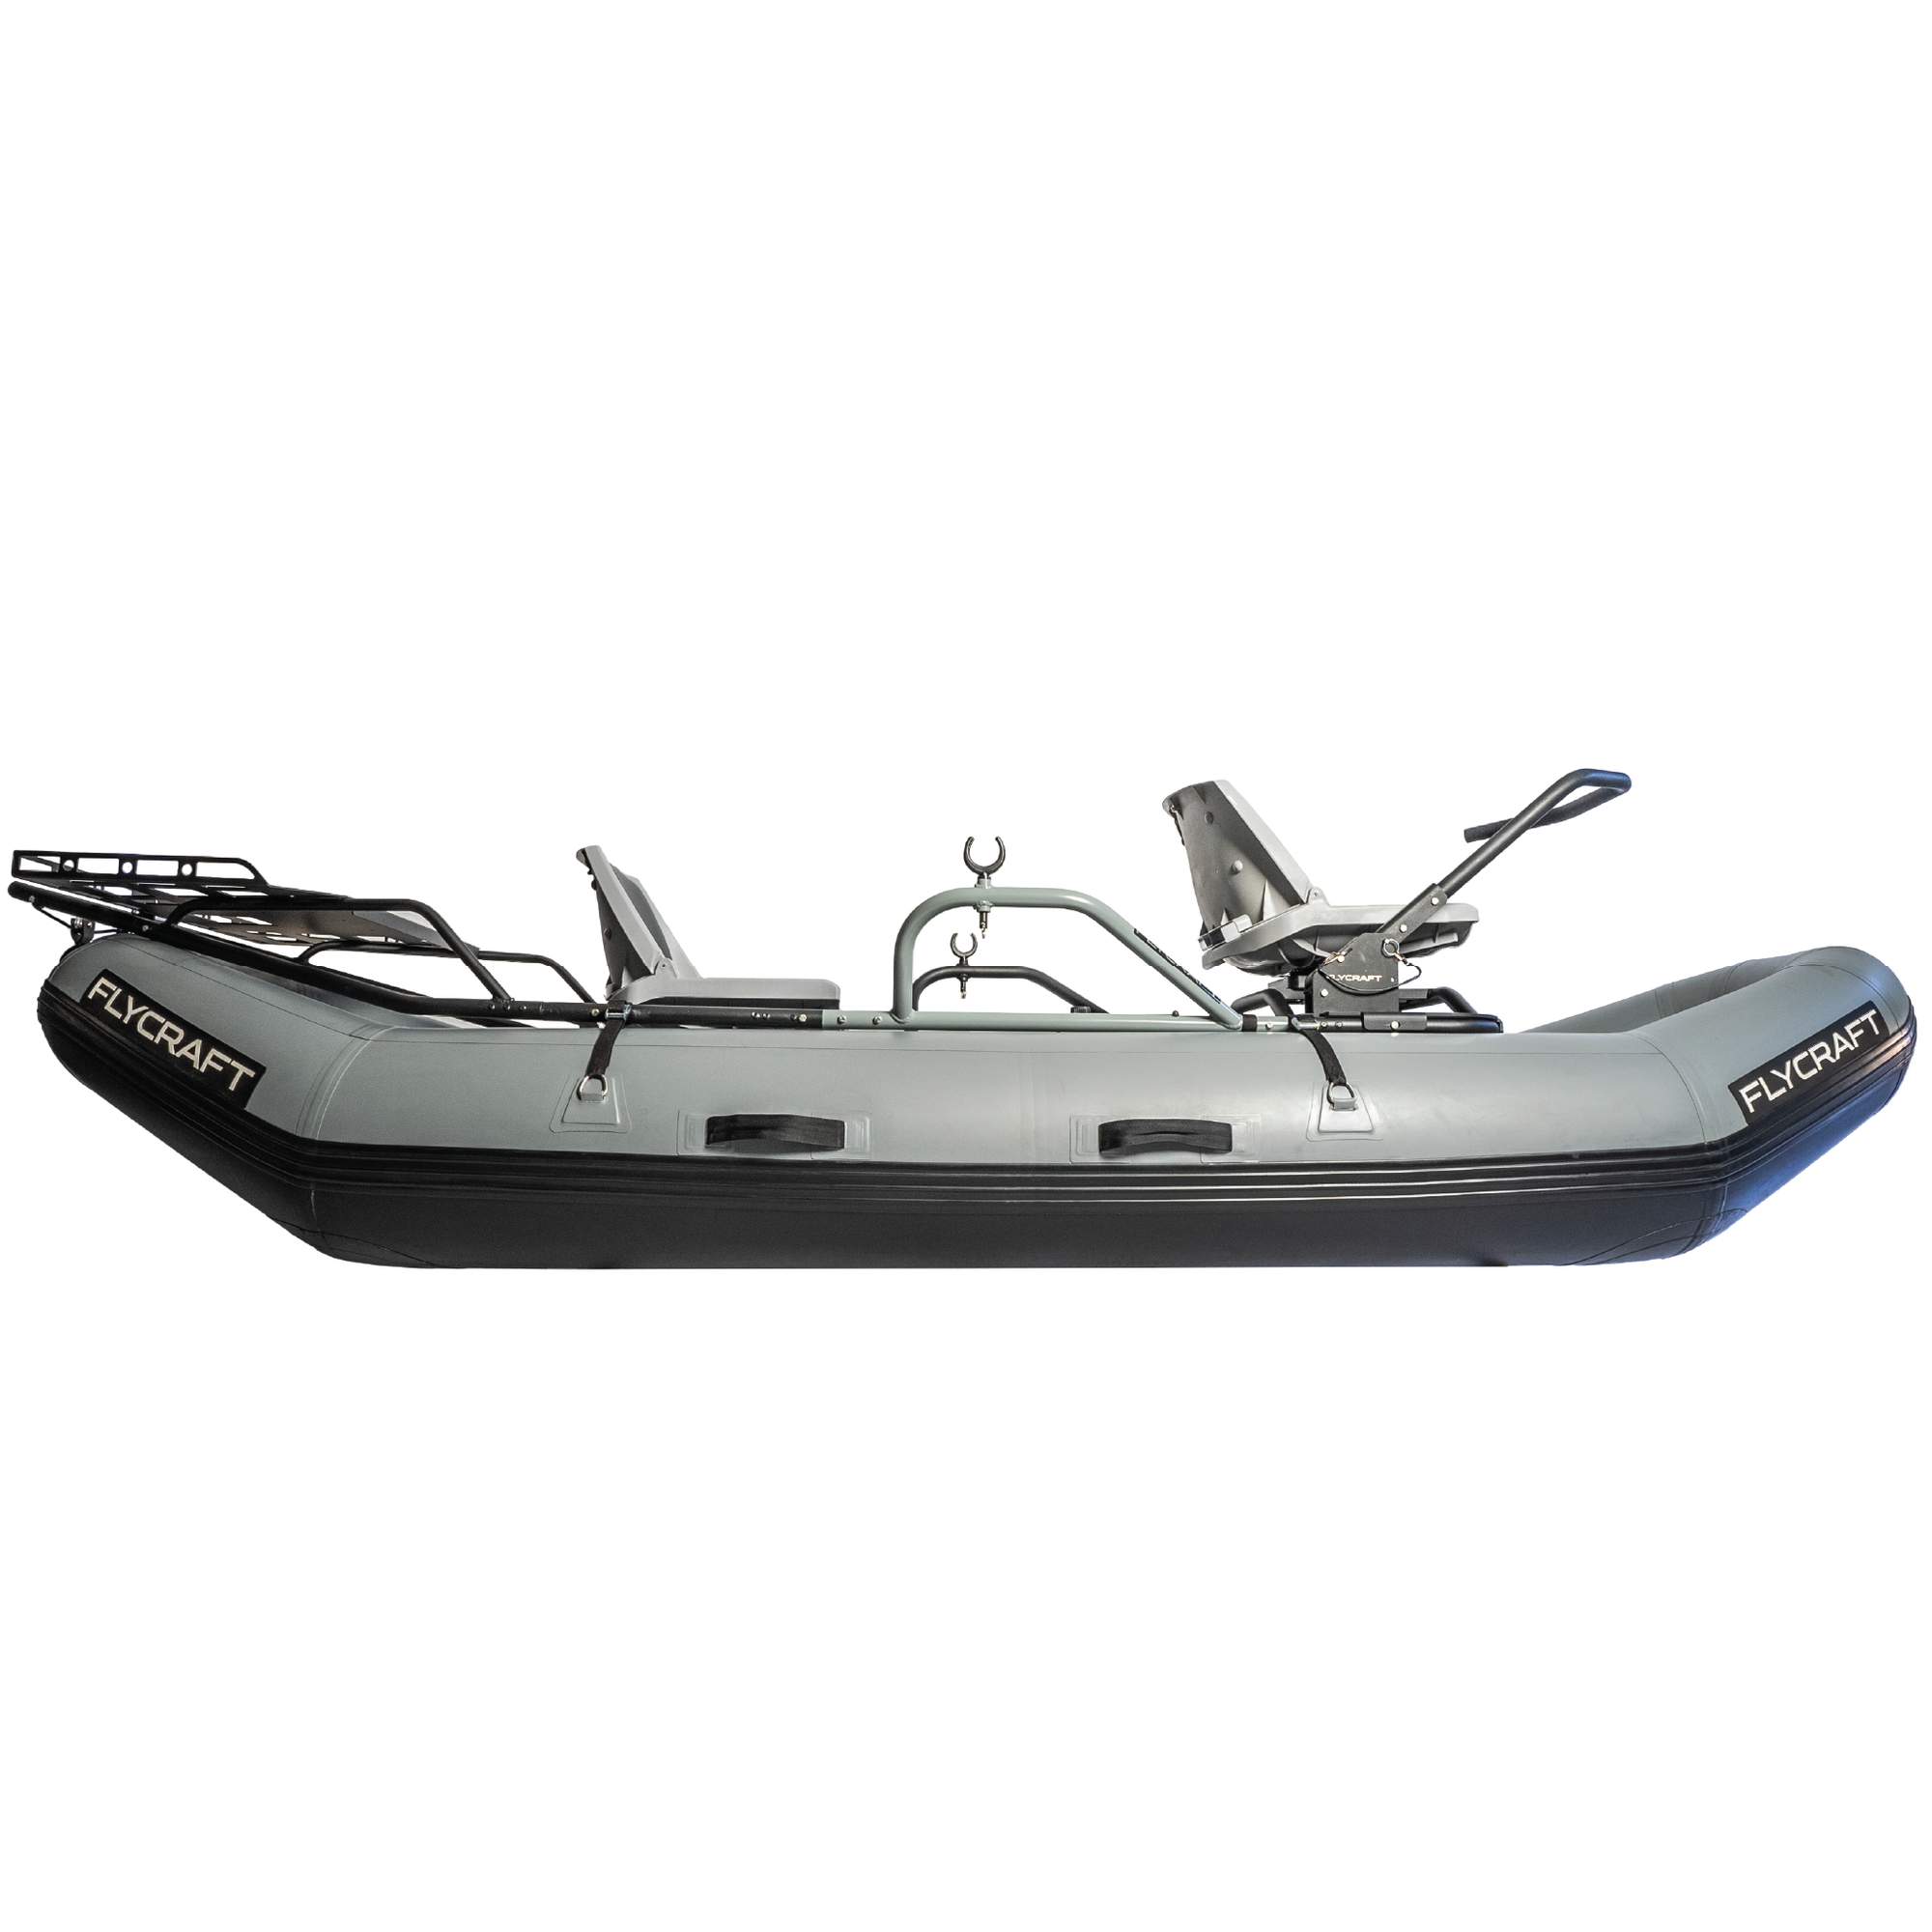 Flycraft's Inflatable Fishing Boat: Guide Fish Package (3-Man